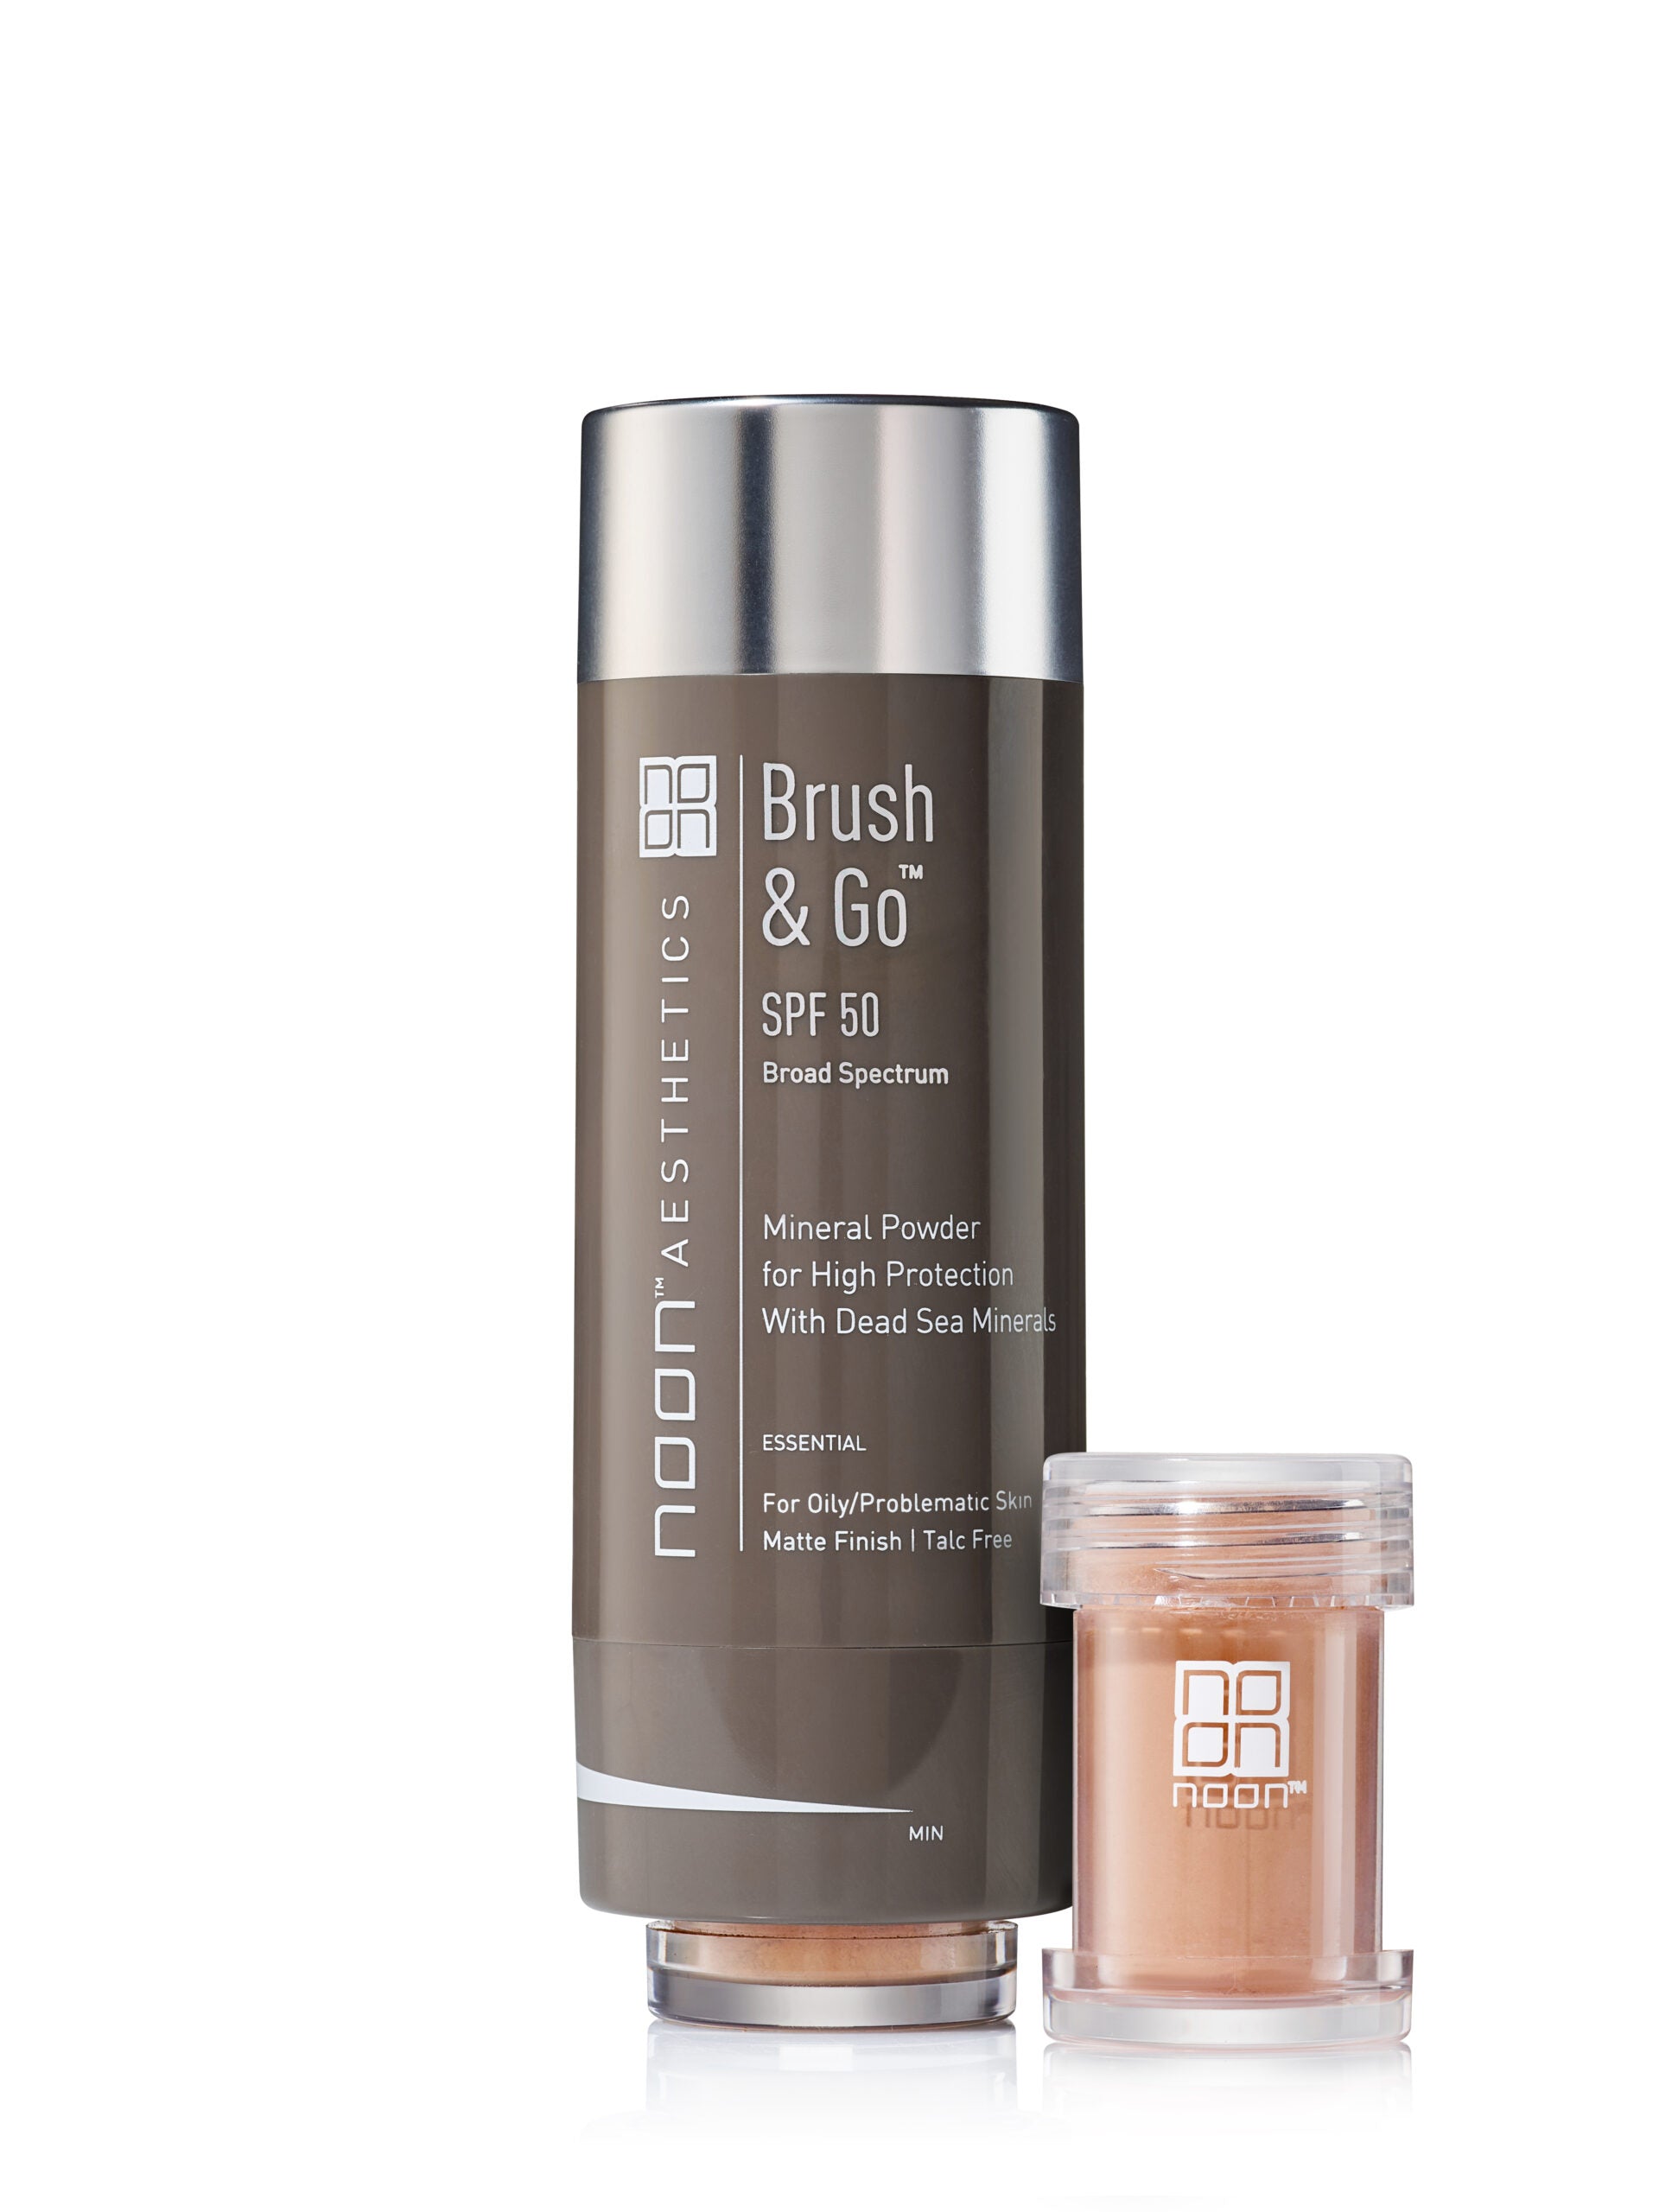 Closed brush for all oily problematic skin | Yuliskin.de